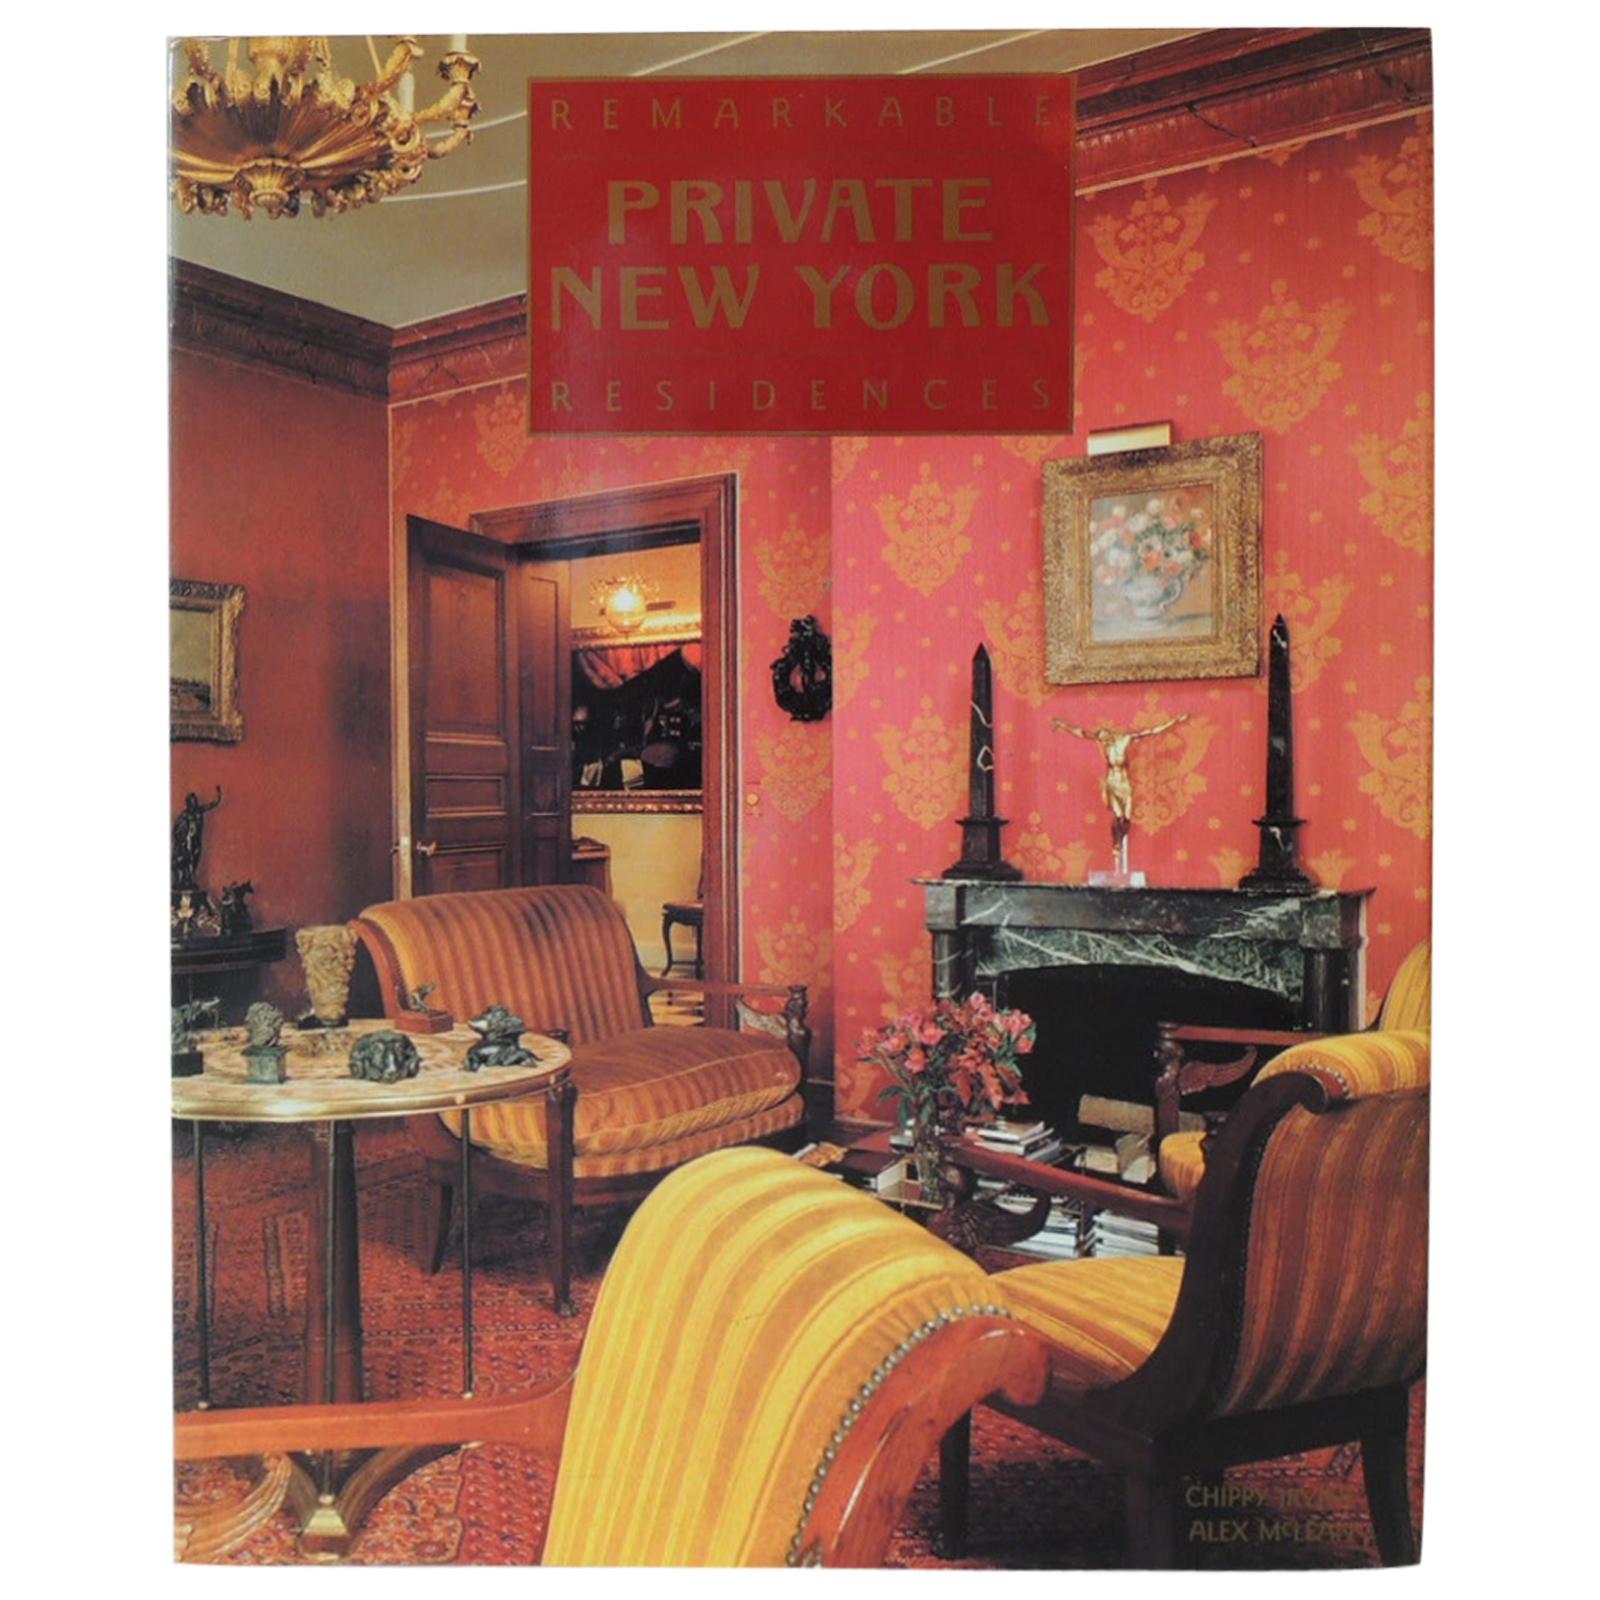 Remarkable Private NY Residences Vintage Decorative Hardcover Book